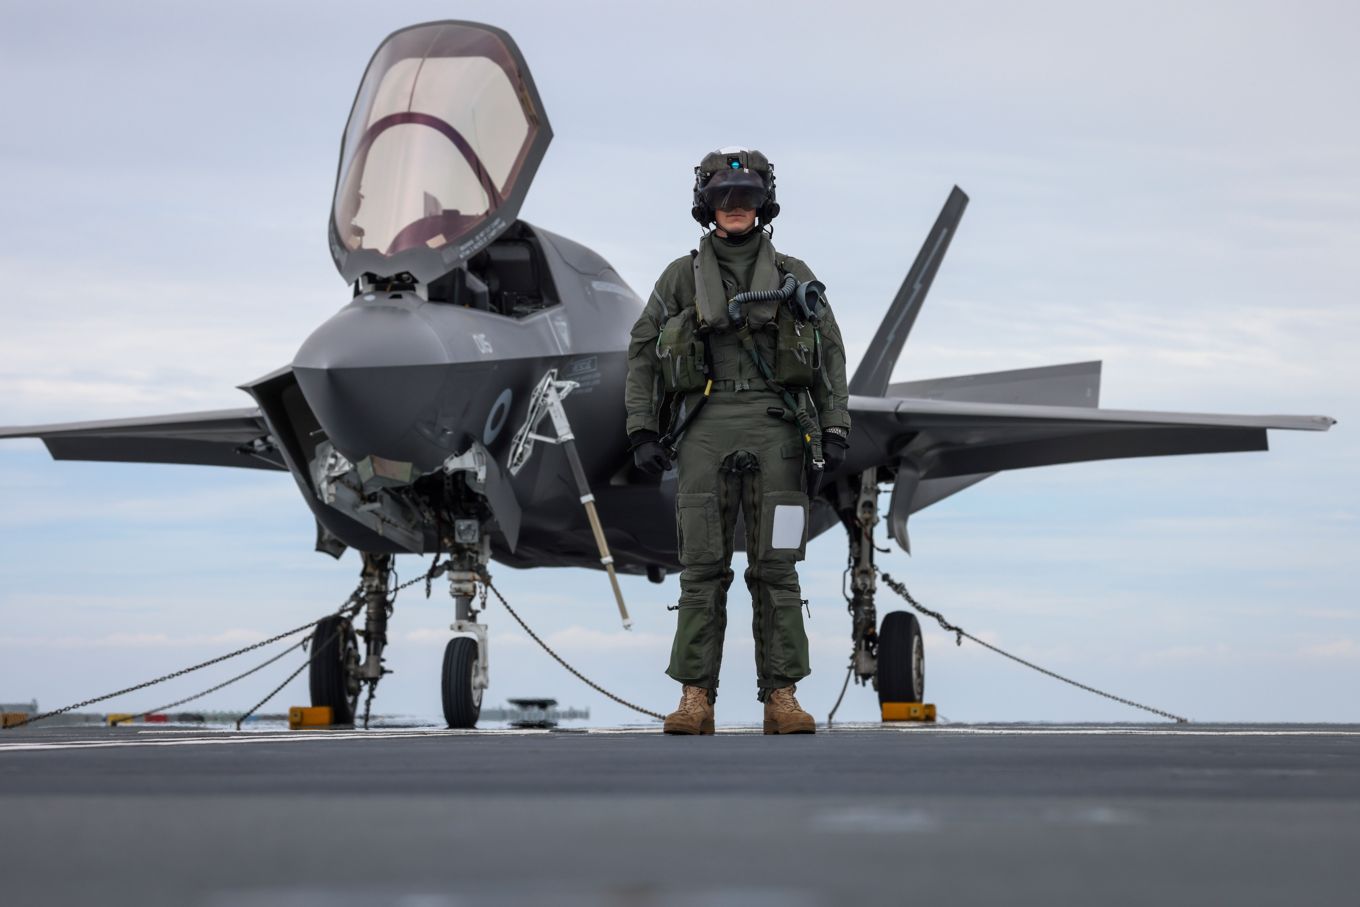 F-35B Lightning with Pilot standing outside.